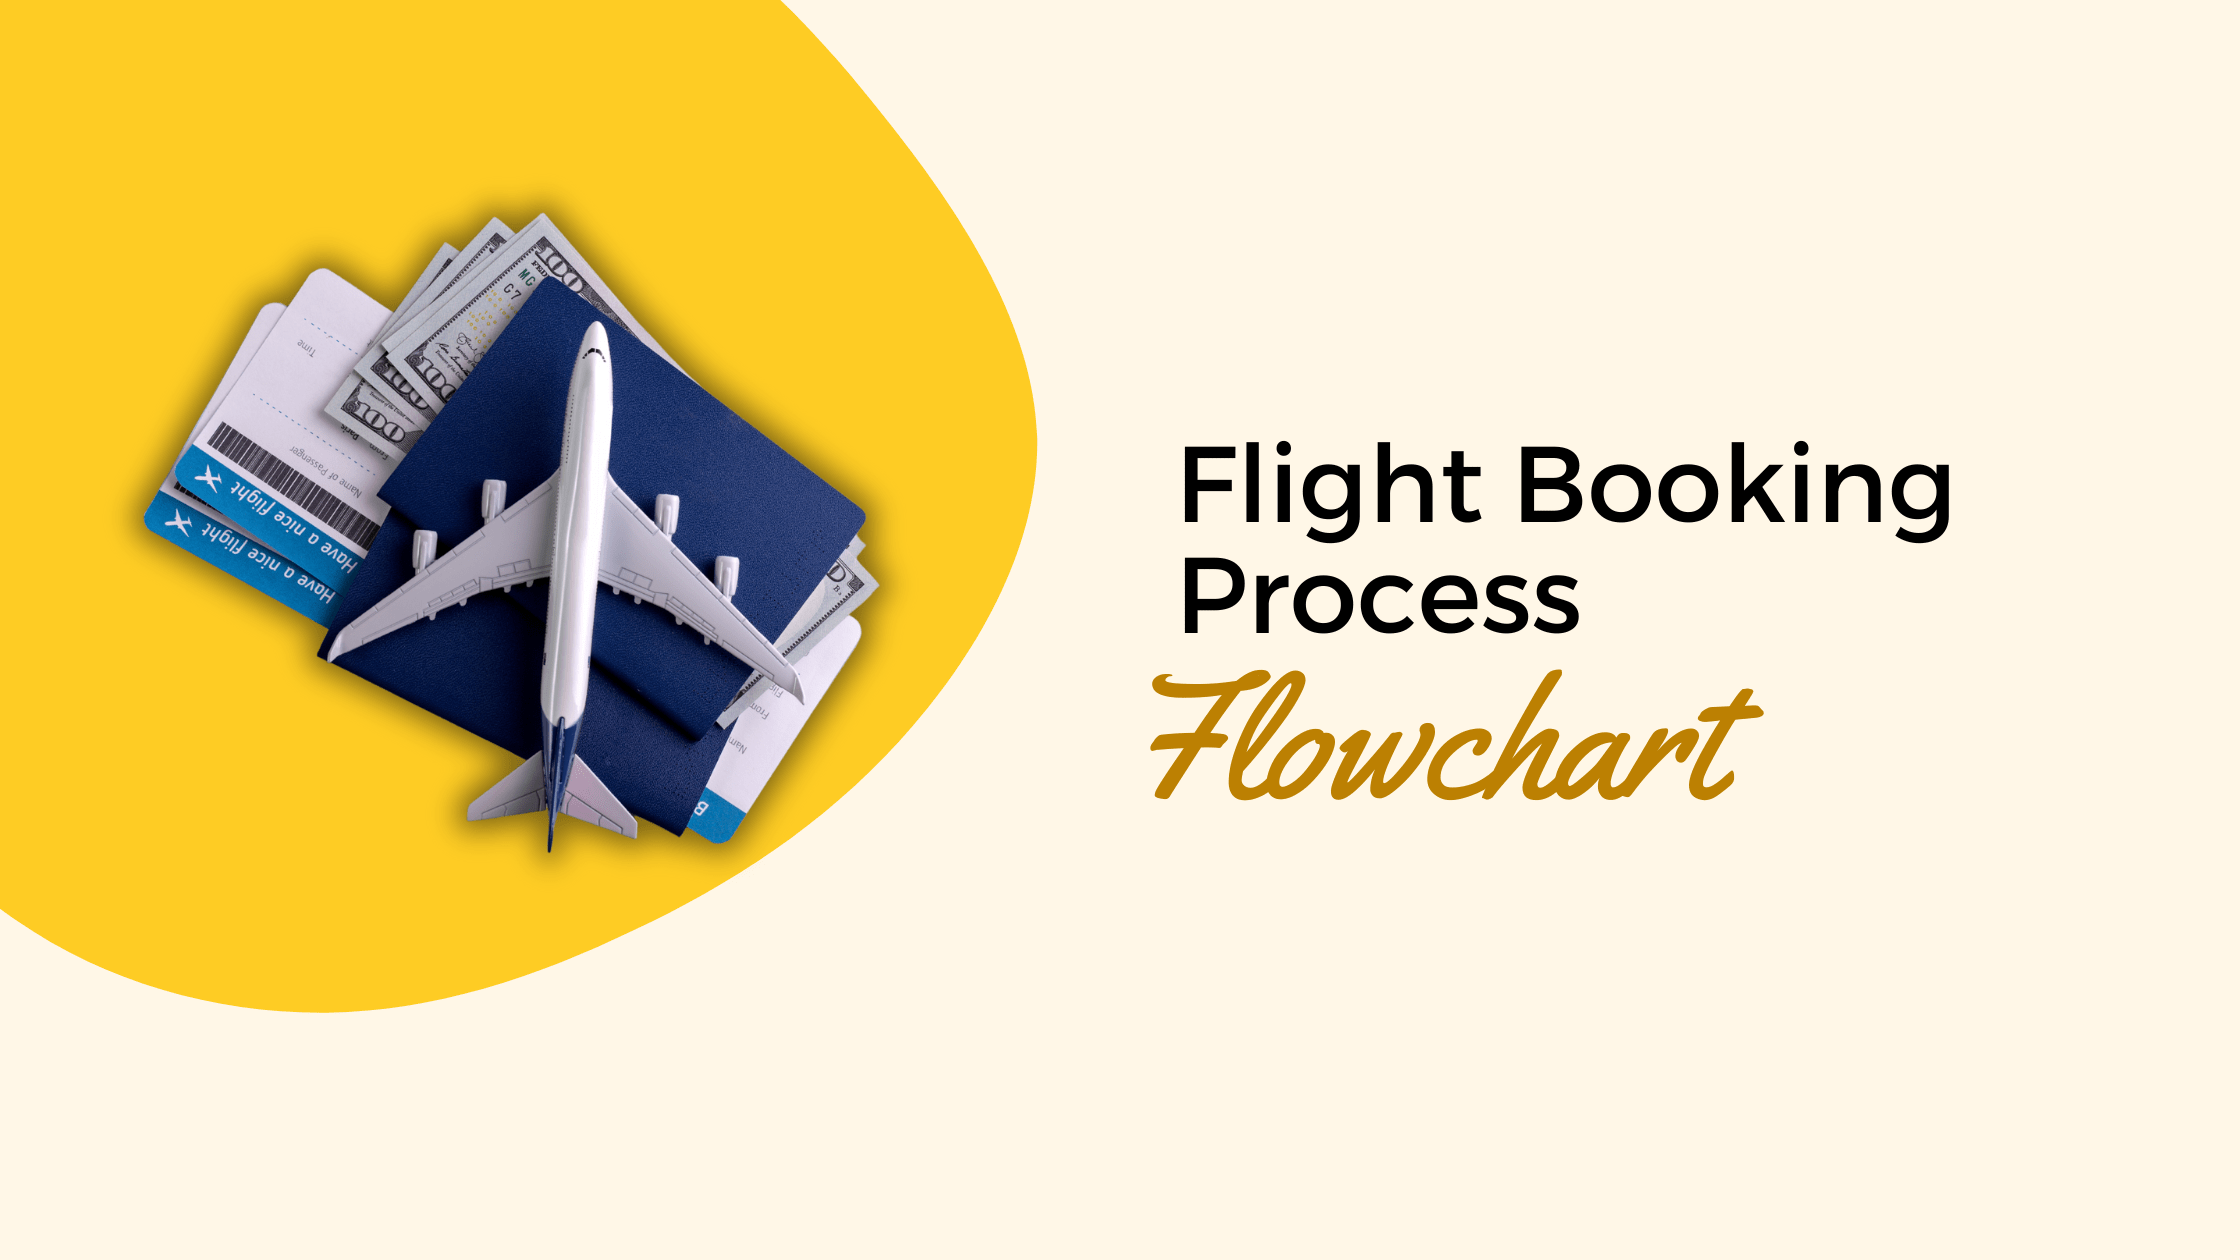 You are currently viewing Flight Booking Process Flowchart: Basic to Innovative